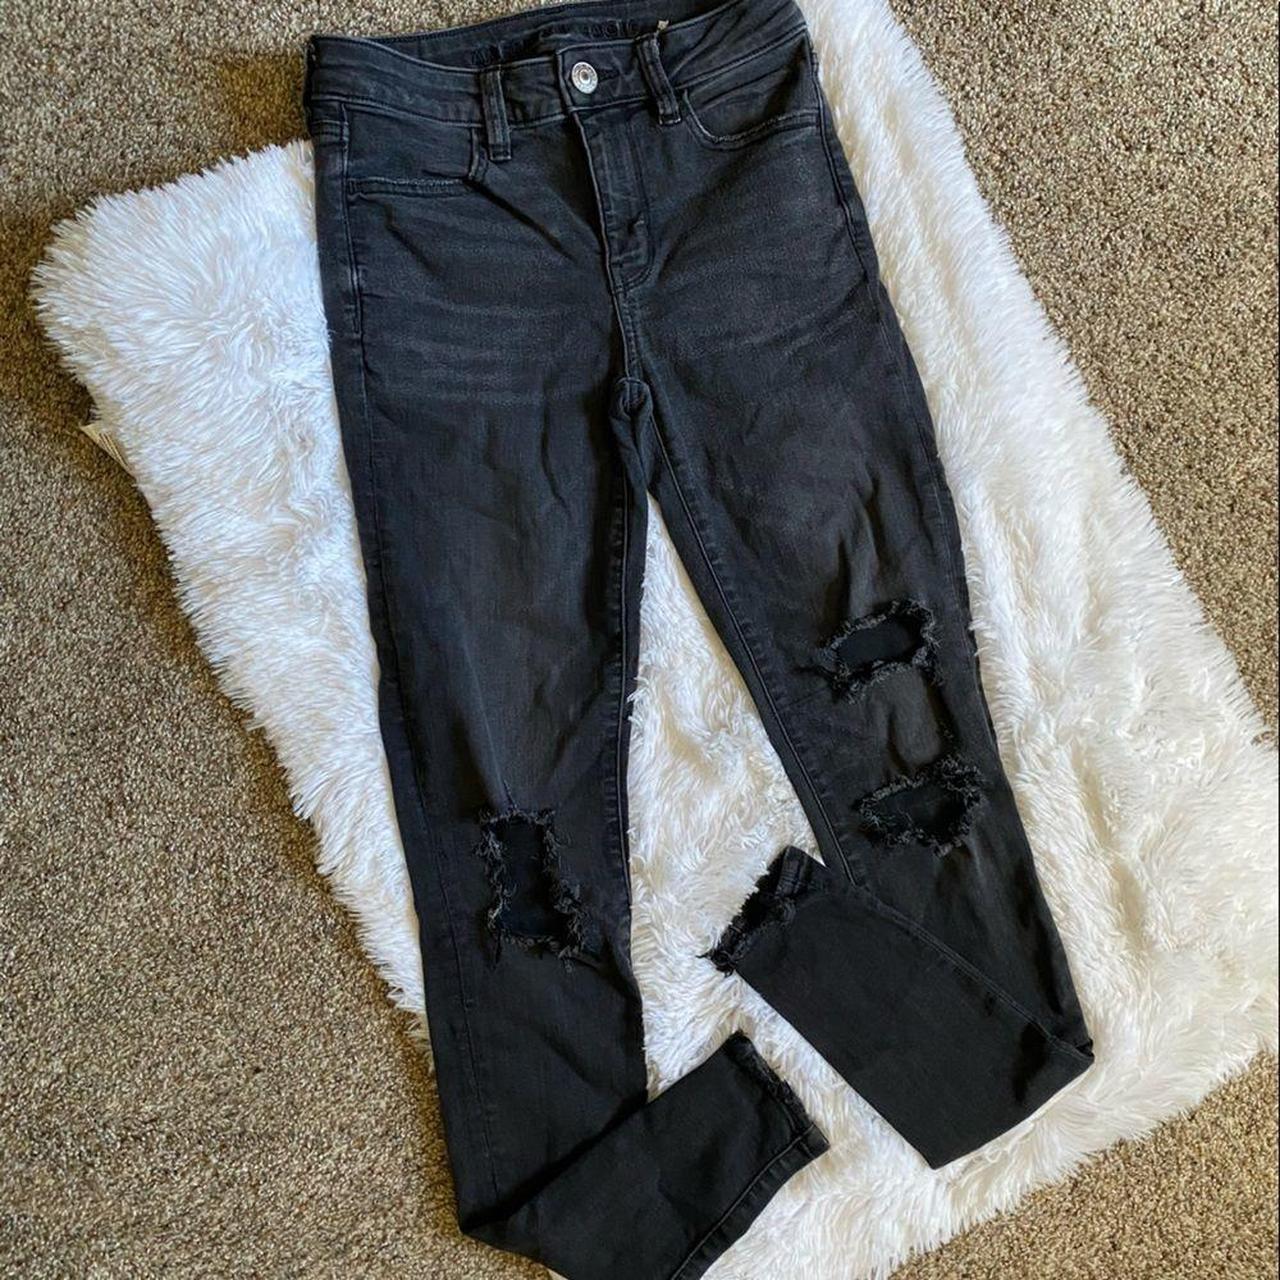 Preloved american eagle distressed/ripped jeans!! - Depop